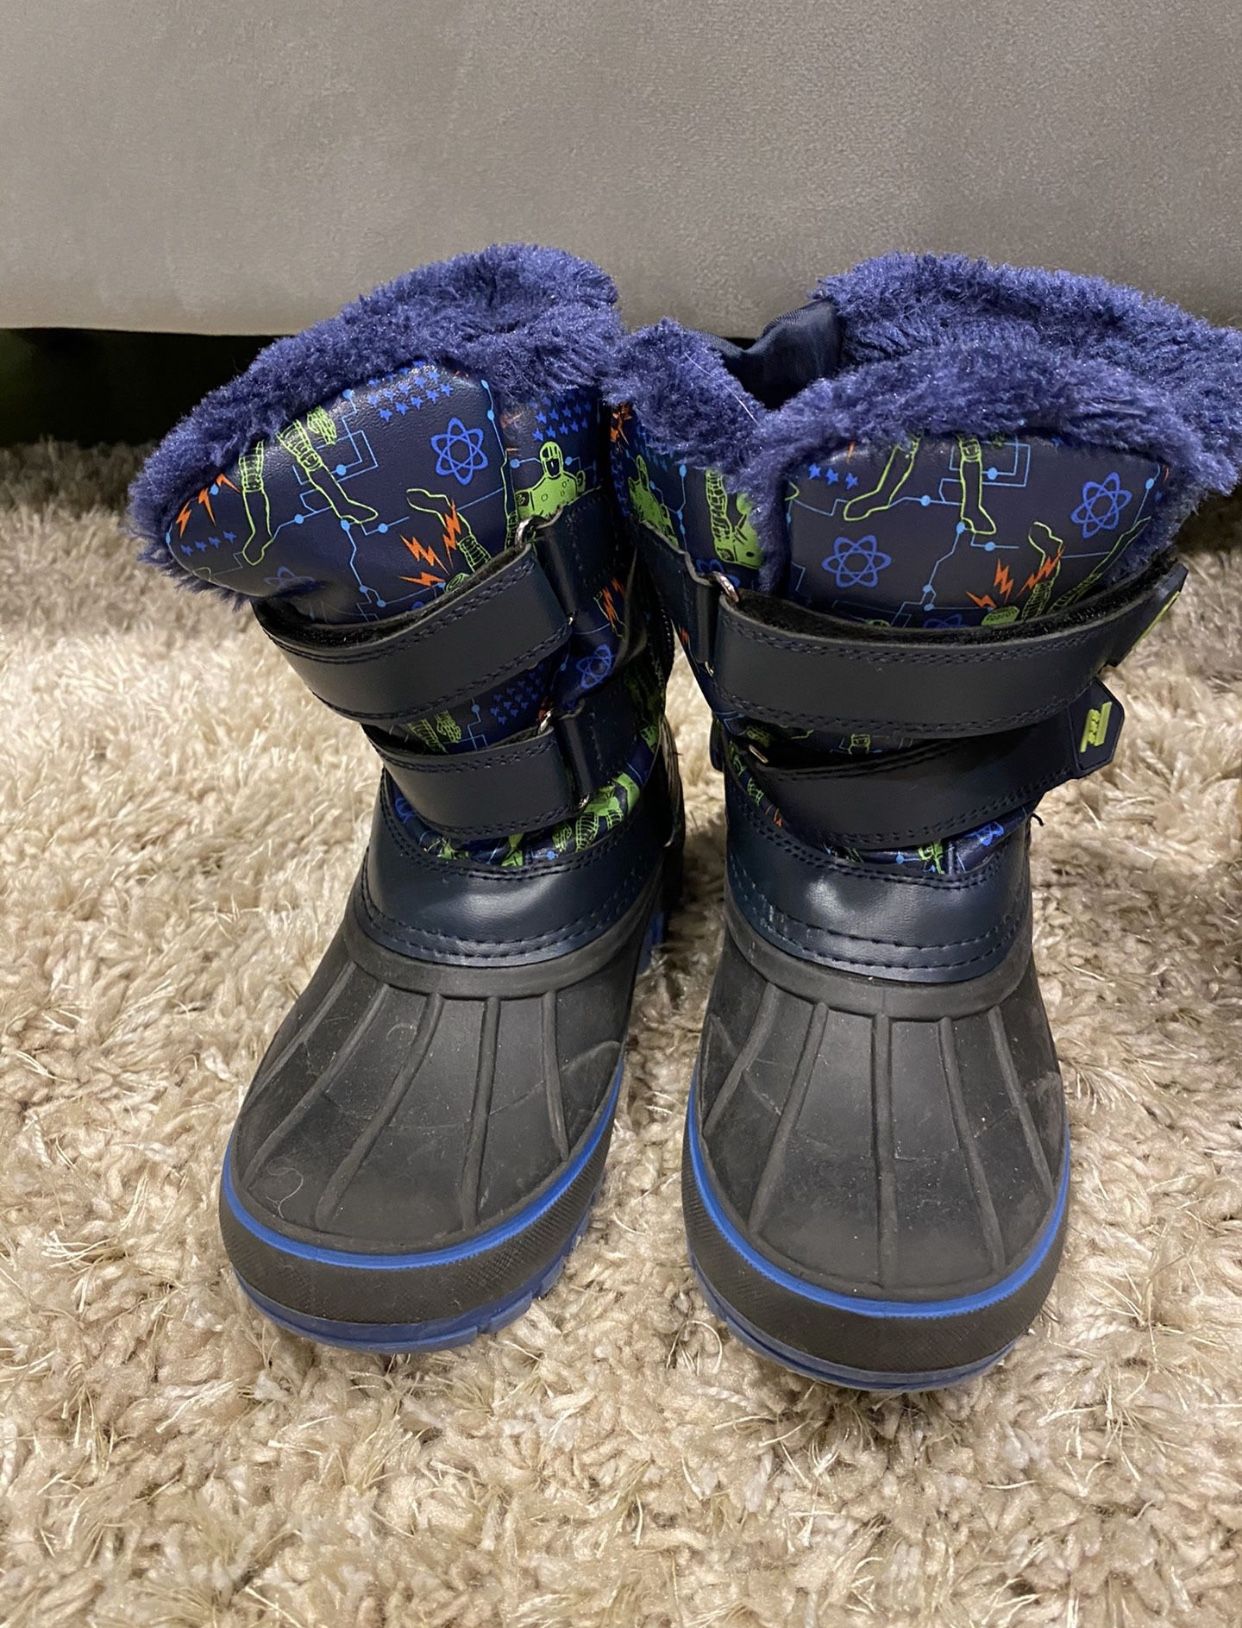 Snow boots for boys or girls